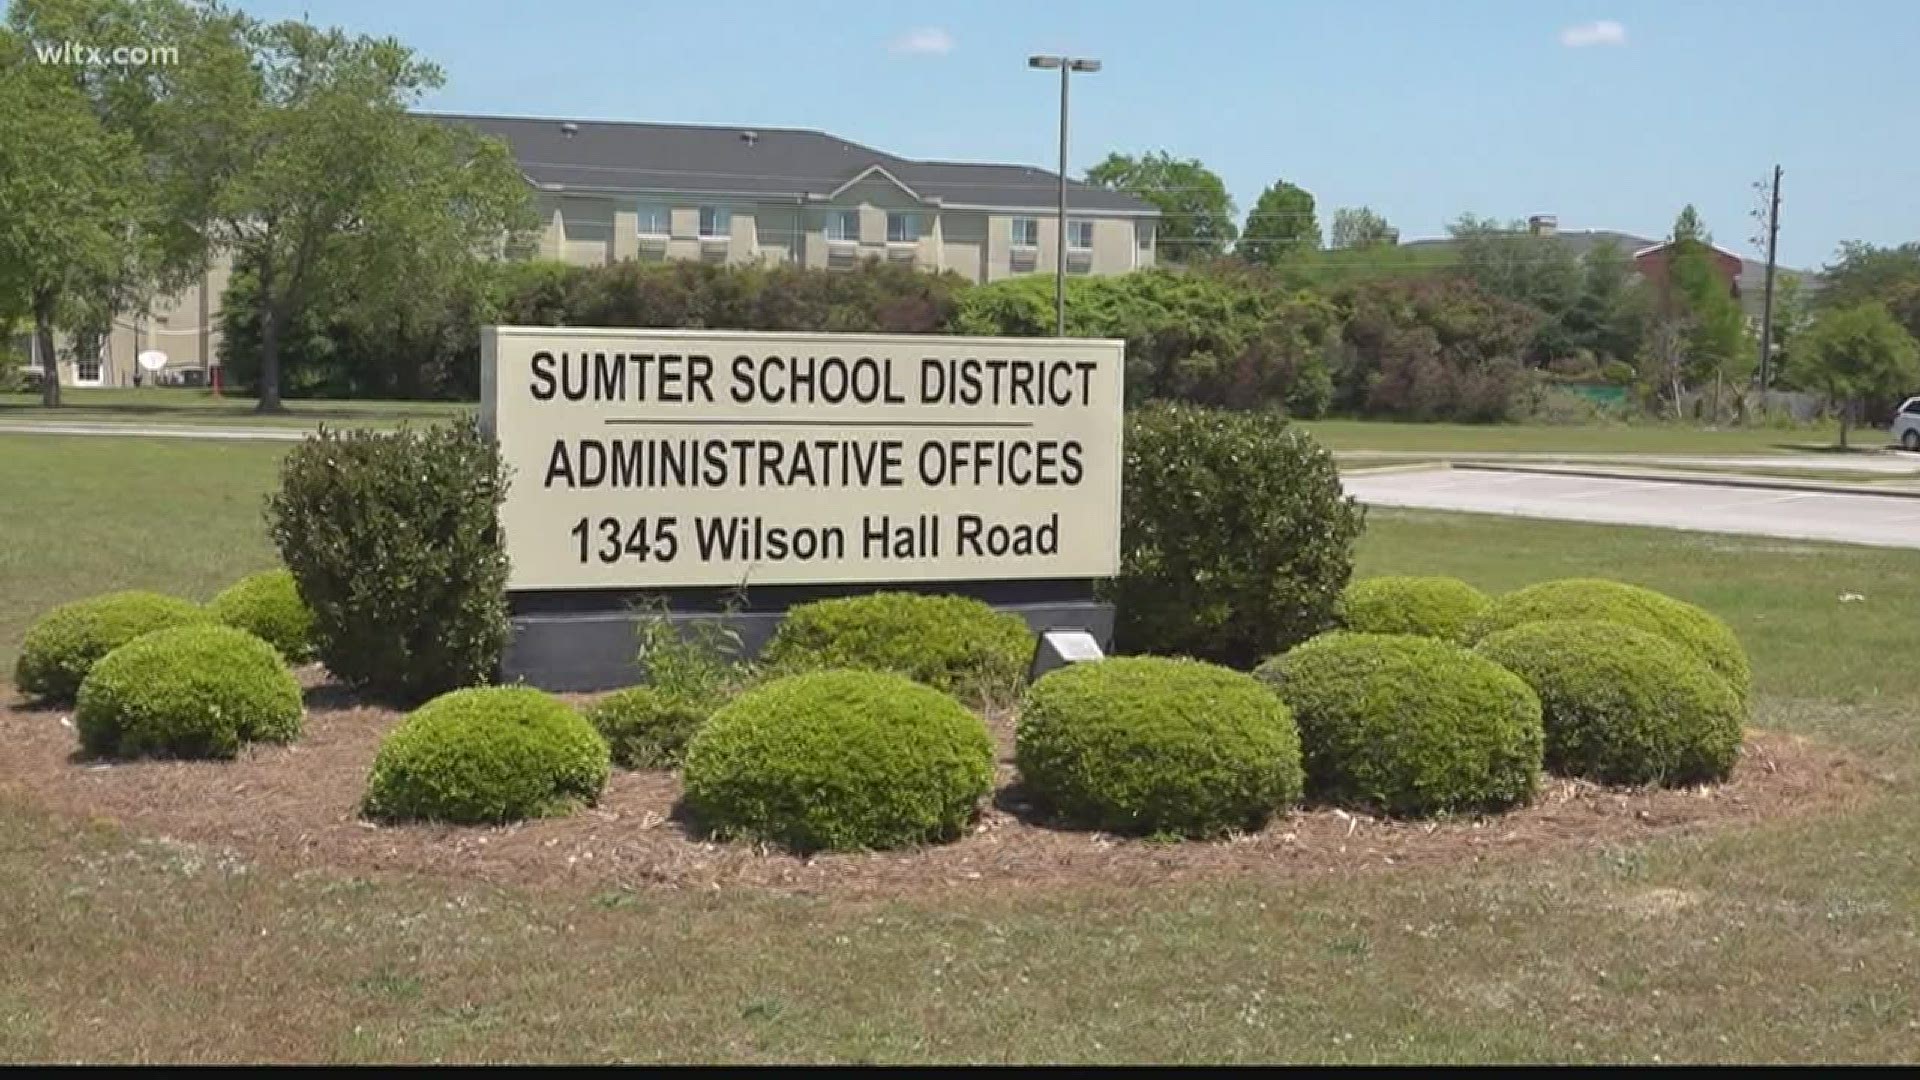 The school board says Sumter remains a high risk community and they will not sacrifice the health or well being of students.